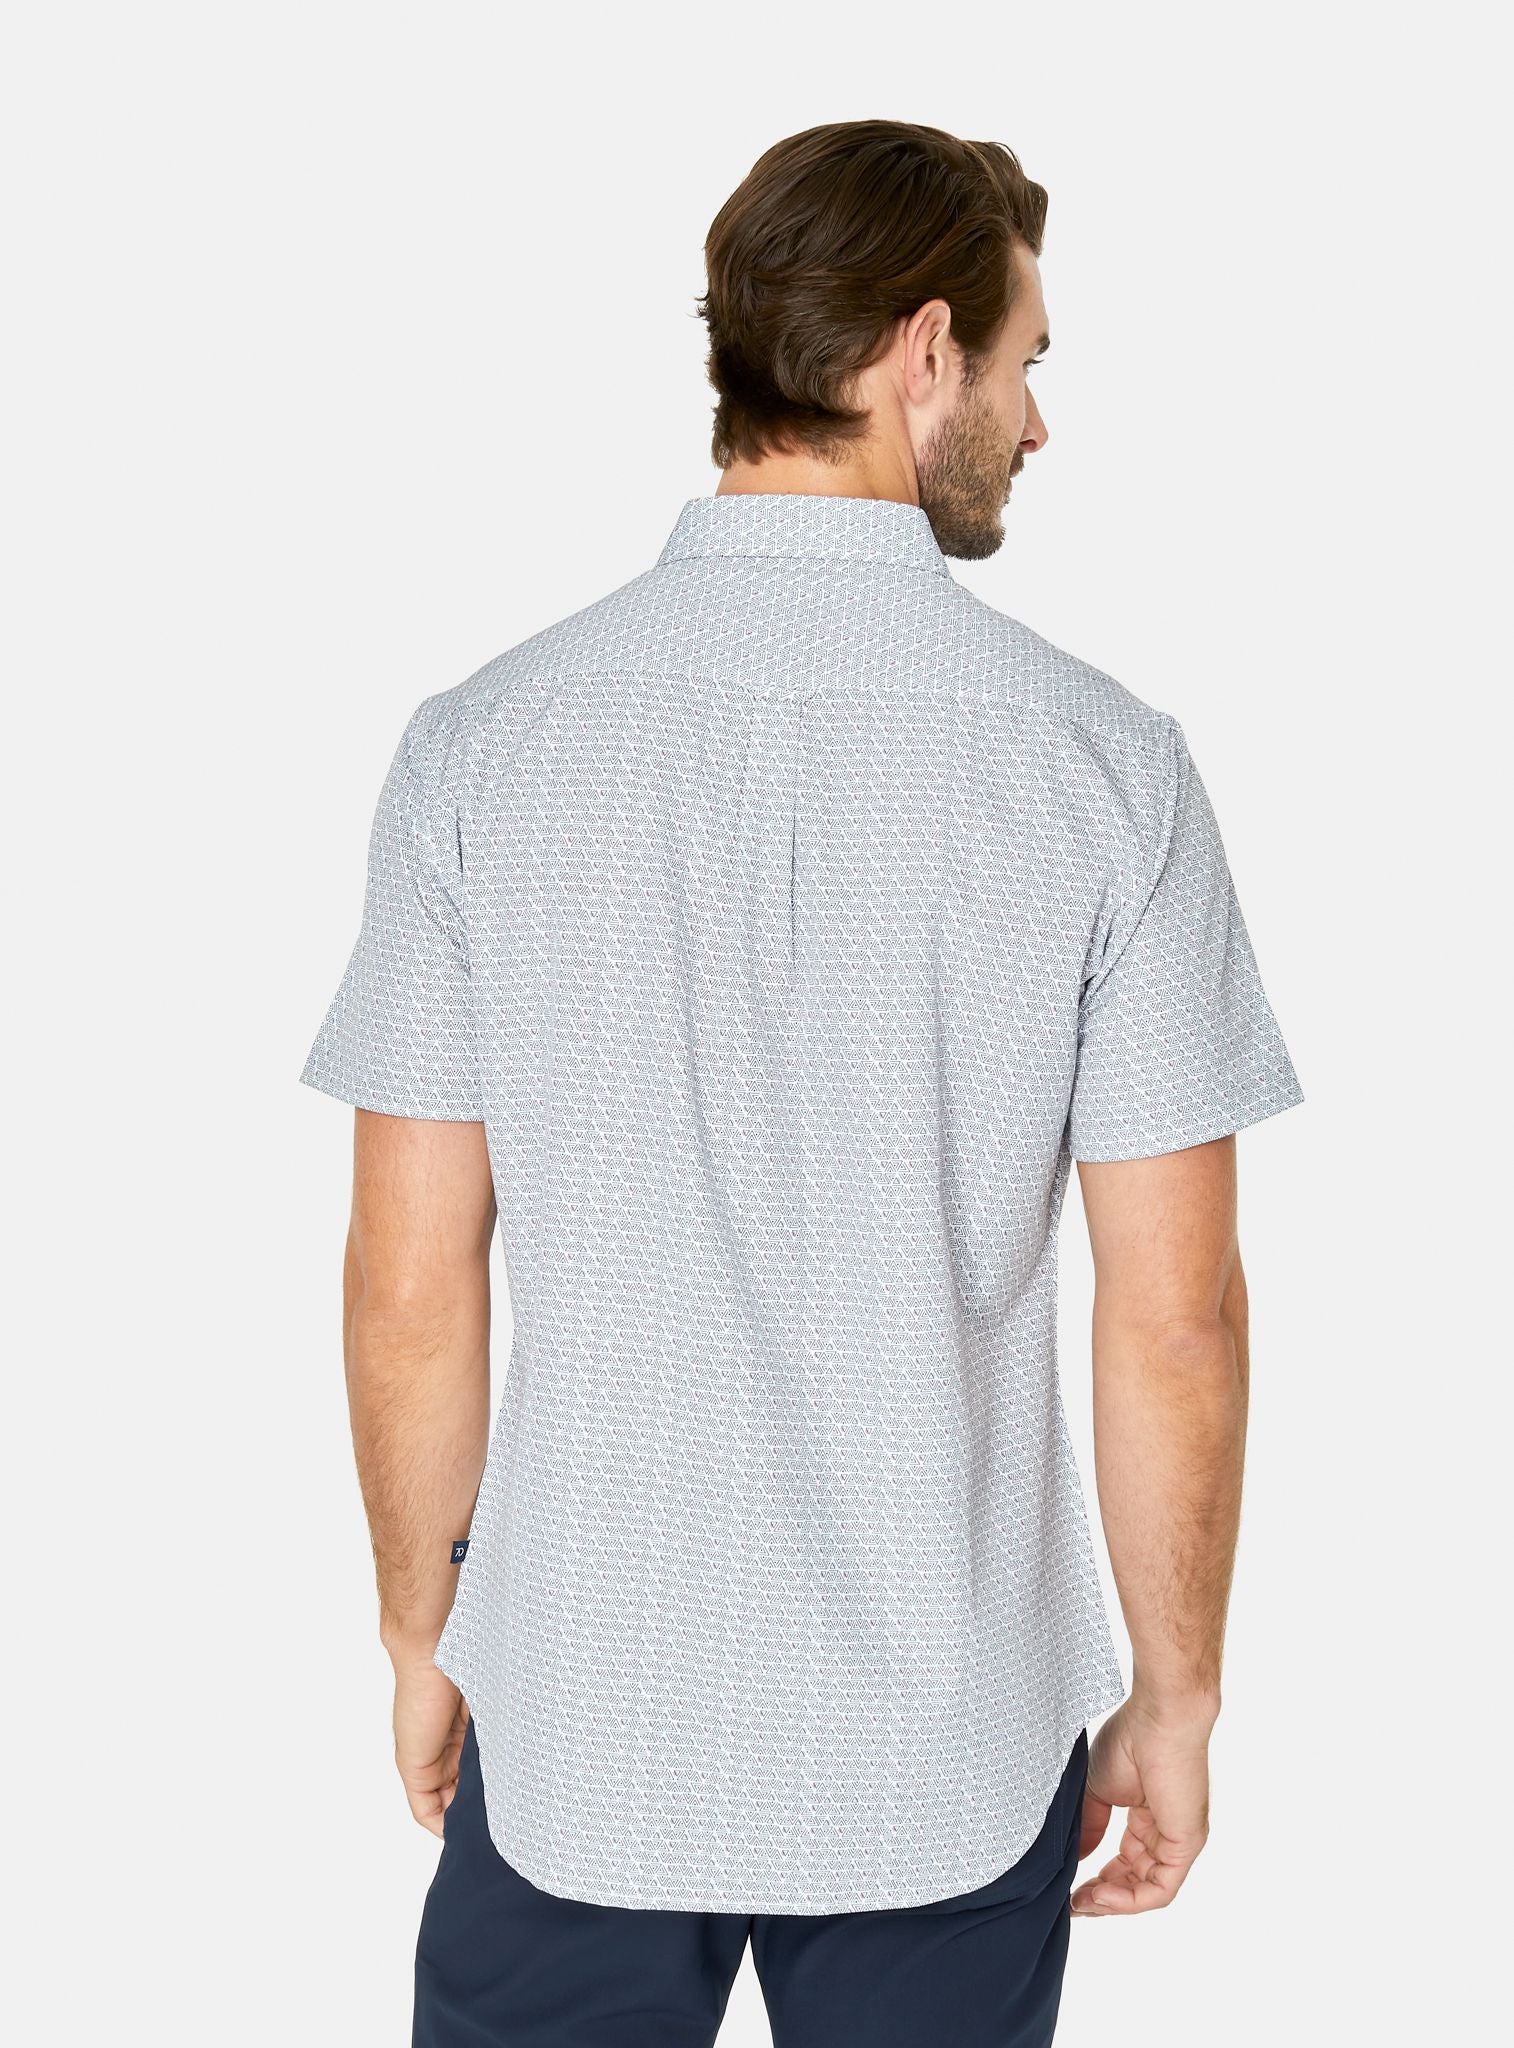 Ups And Downs 4-Way Stretch Shirt